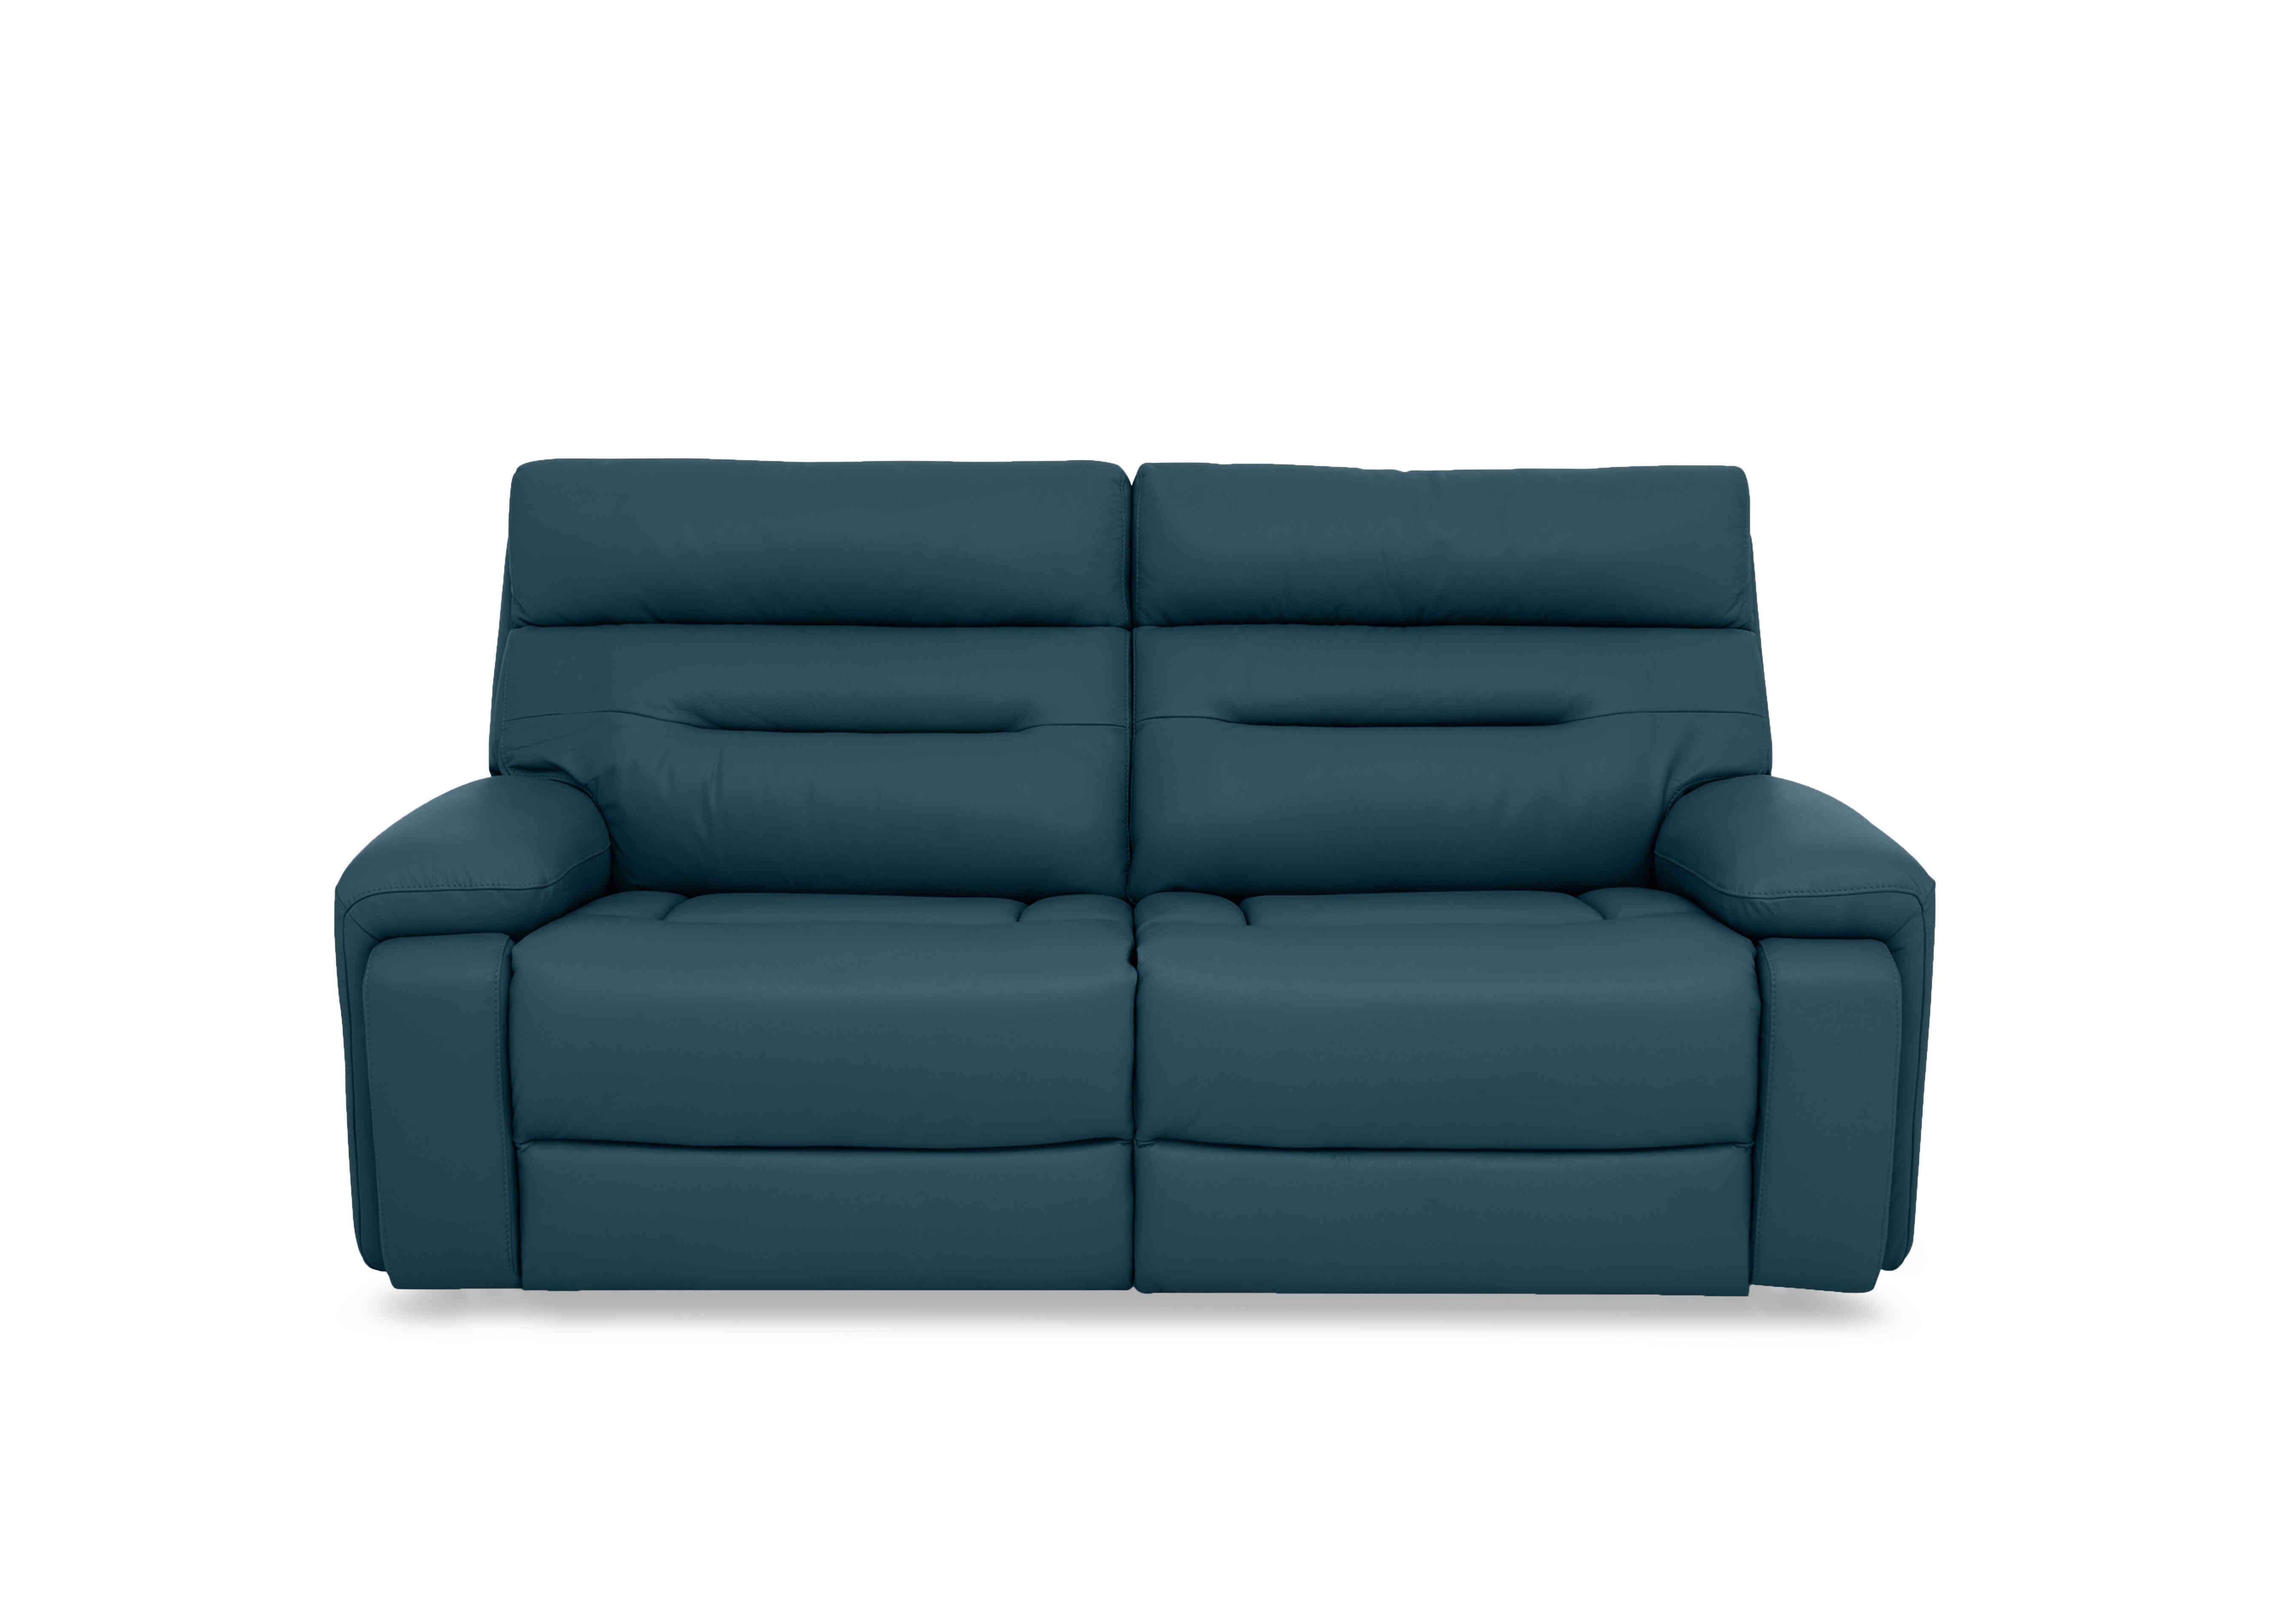 Cinemax 3 Seater Leather Sofa in Le-9314 Midnight Jade on Furniture Village